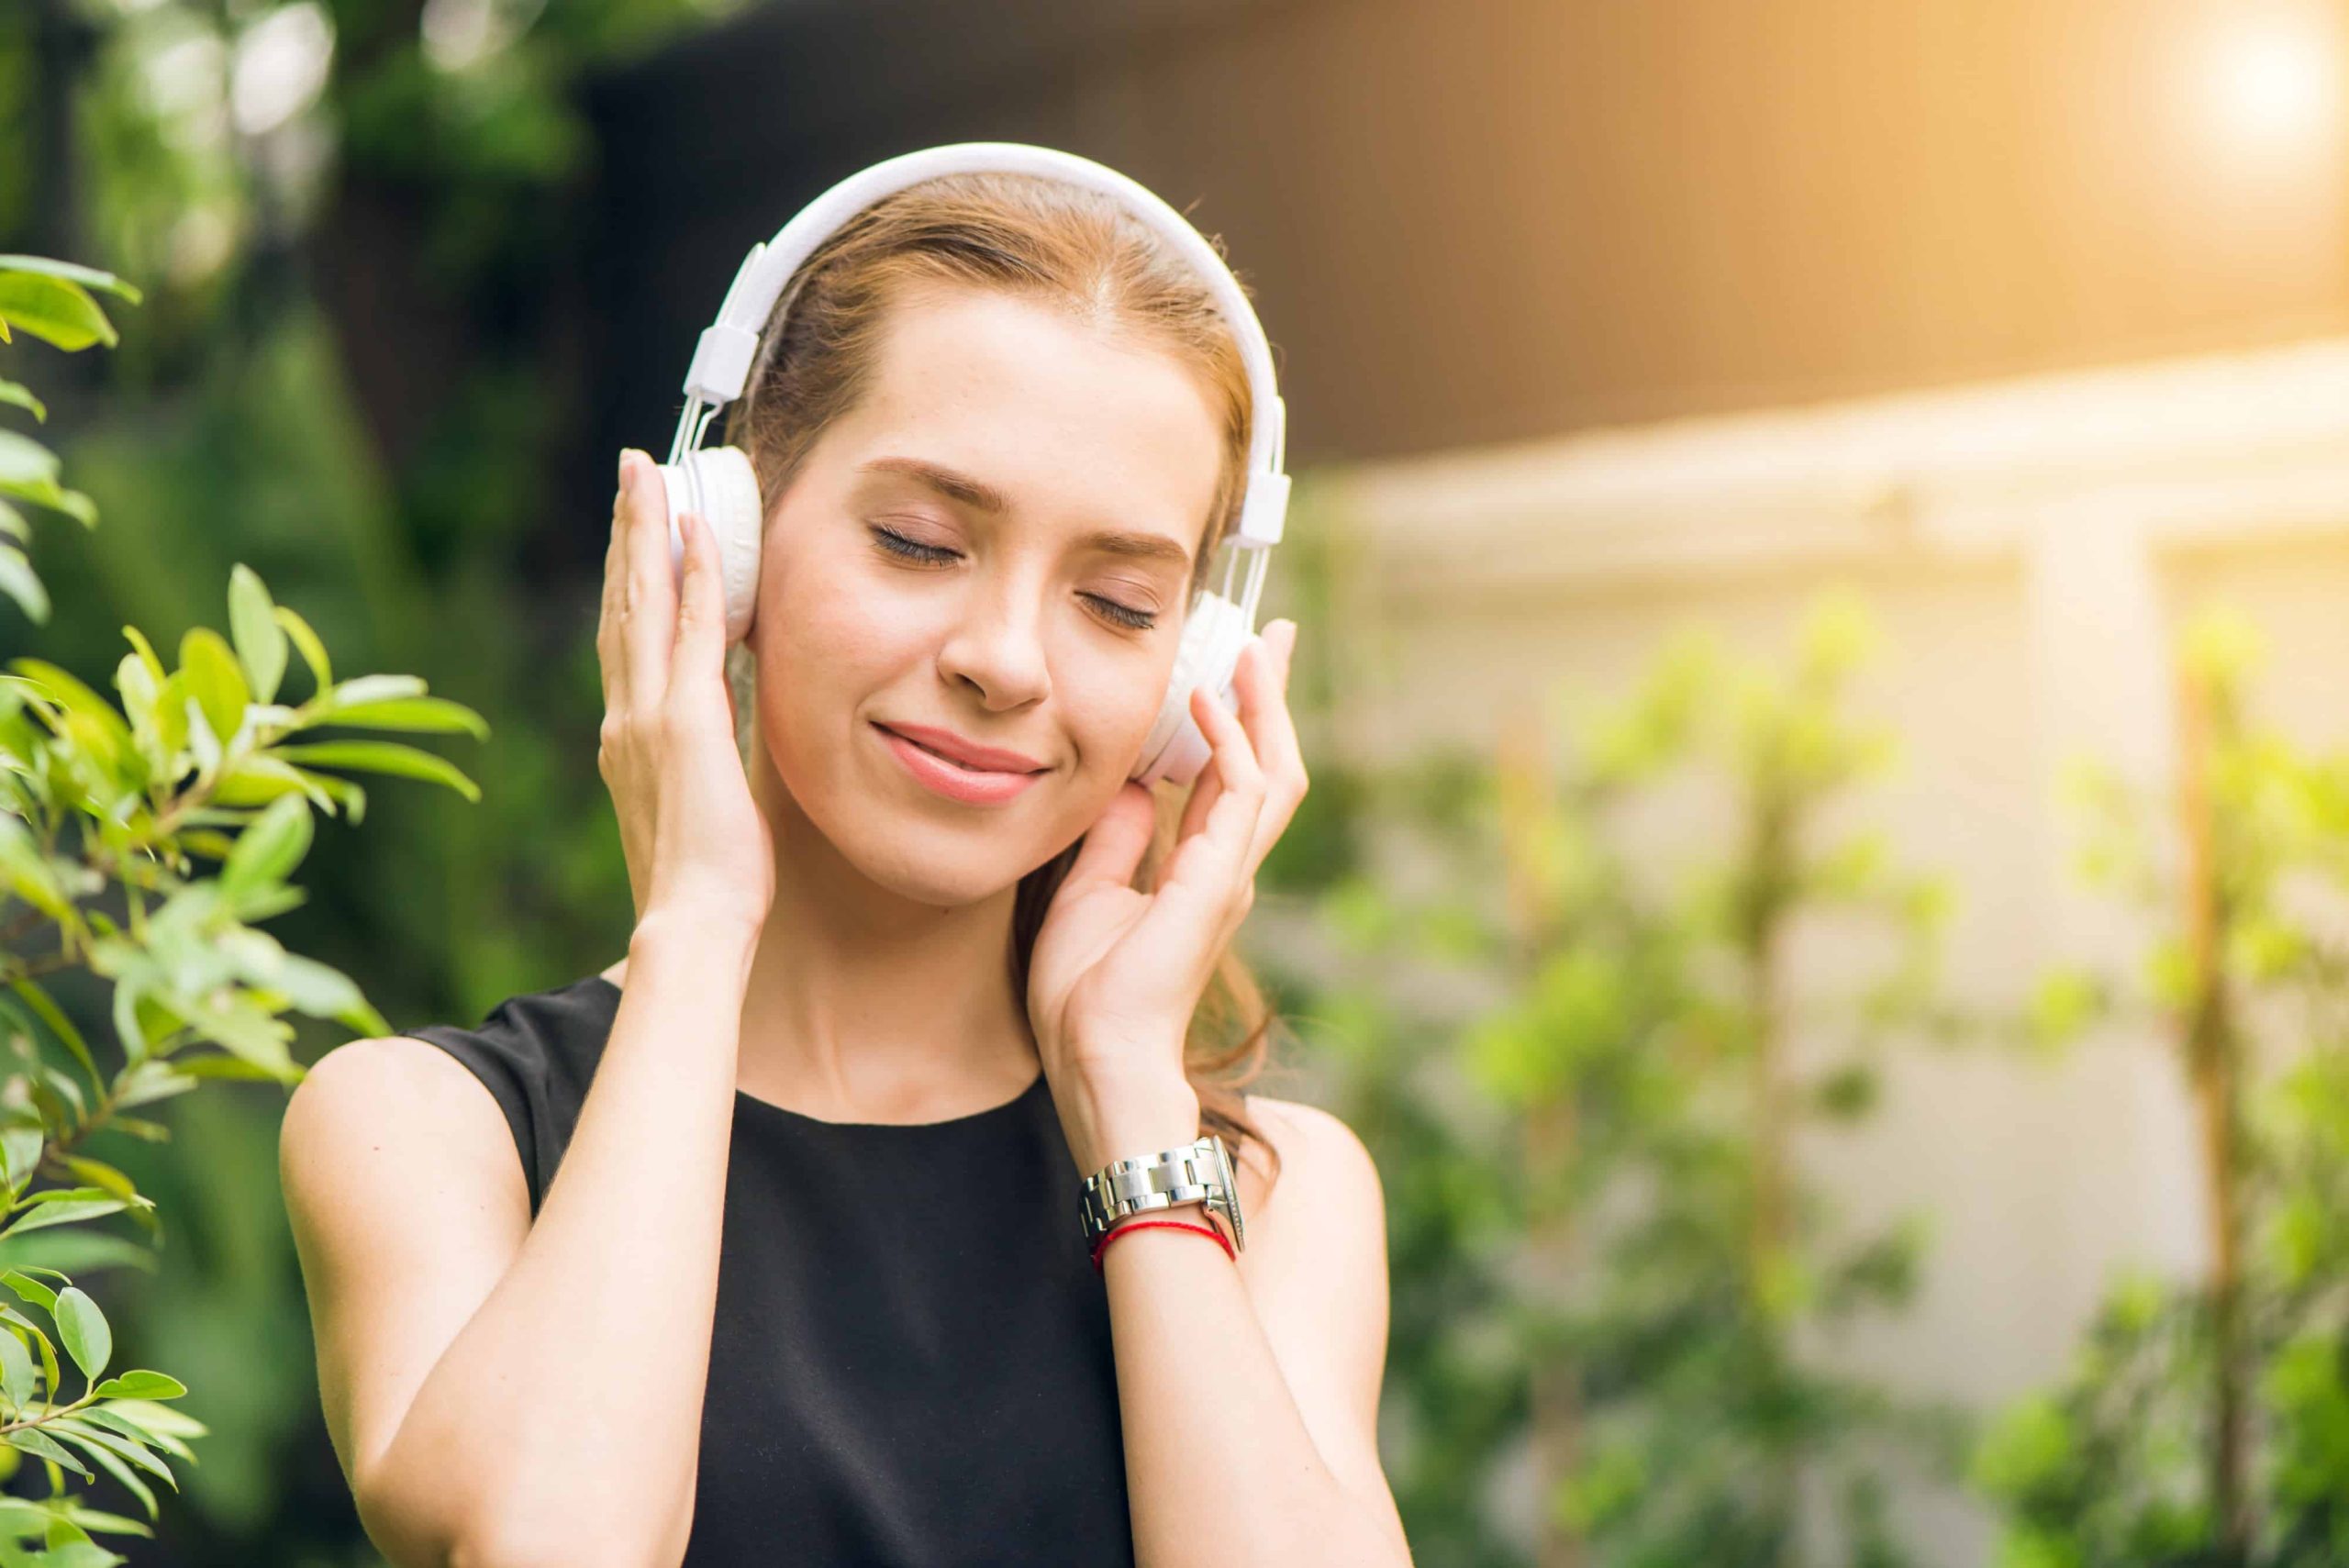 How to Kill Time When Listening to Music